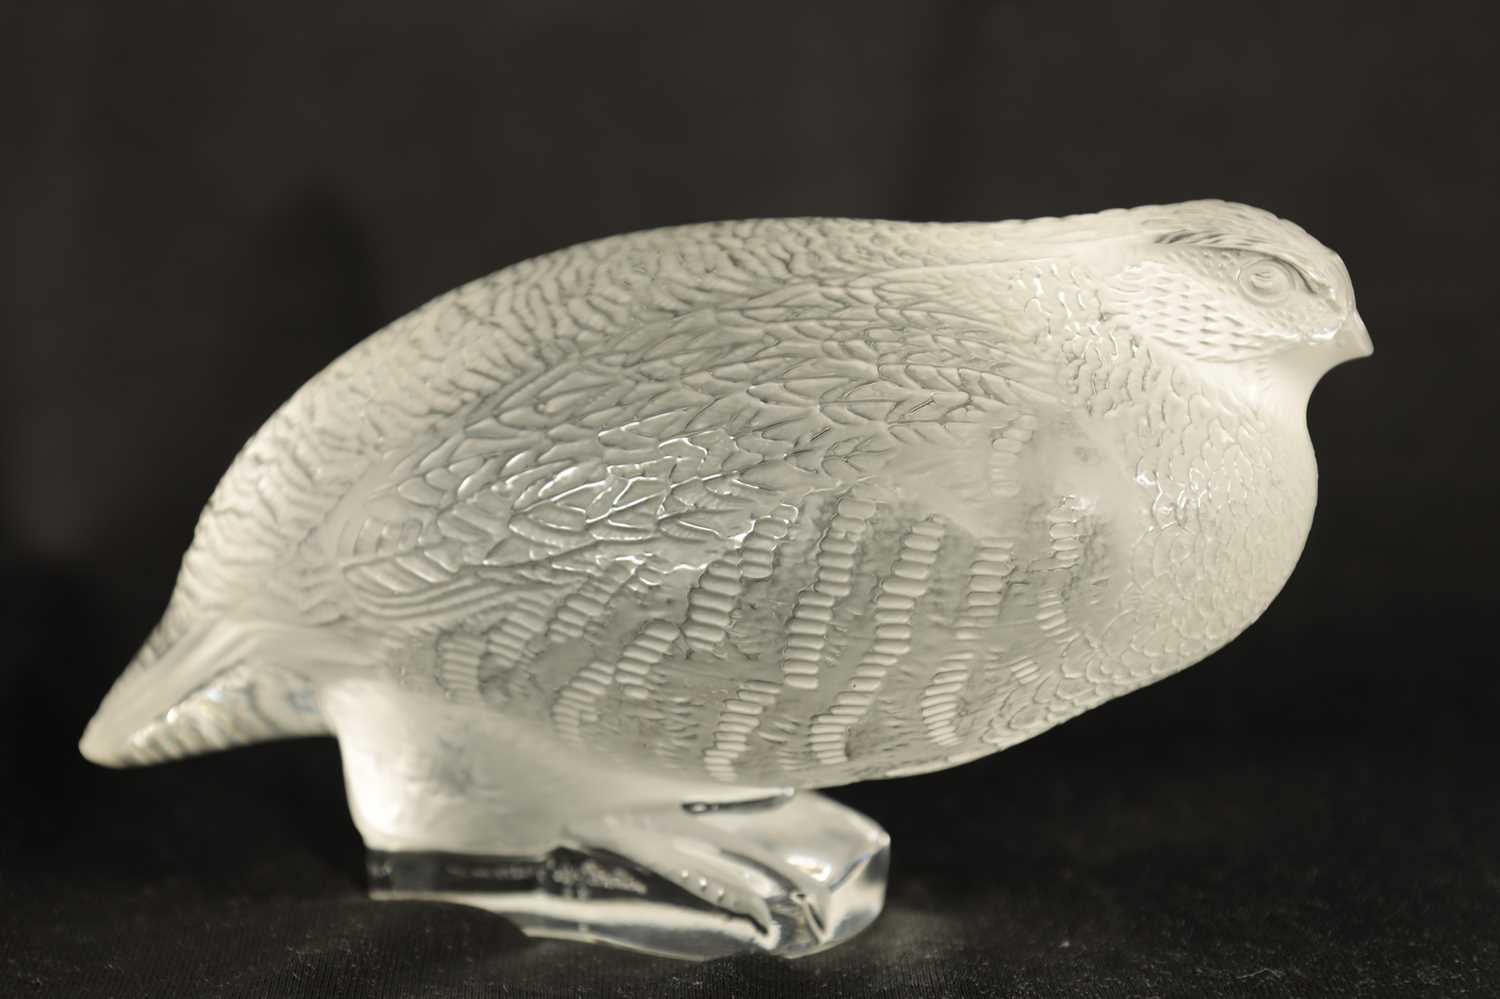 A LALIQUE FRANCE FROSTED GLASS BIRD SCULPTURE - Image 5 of 10